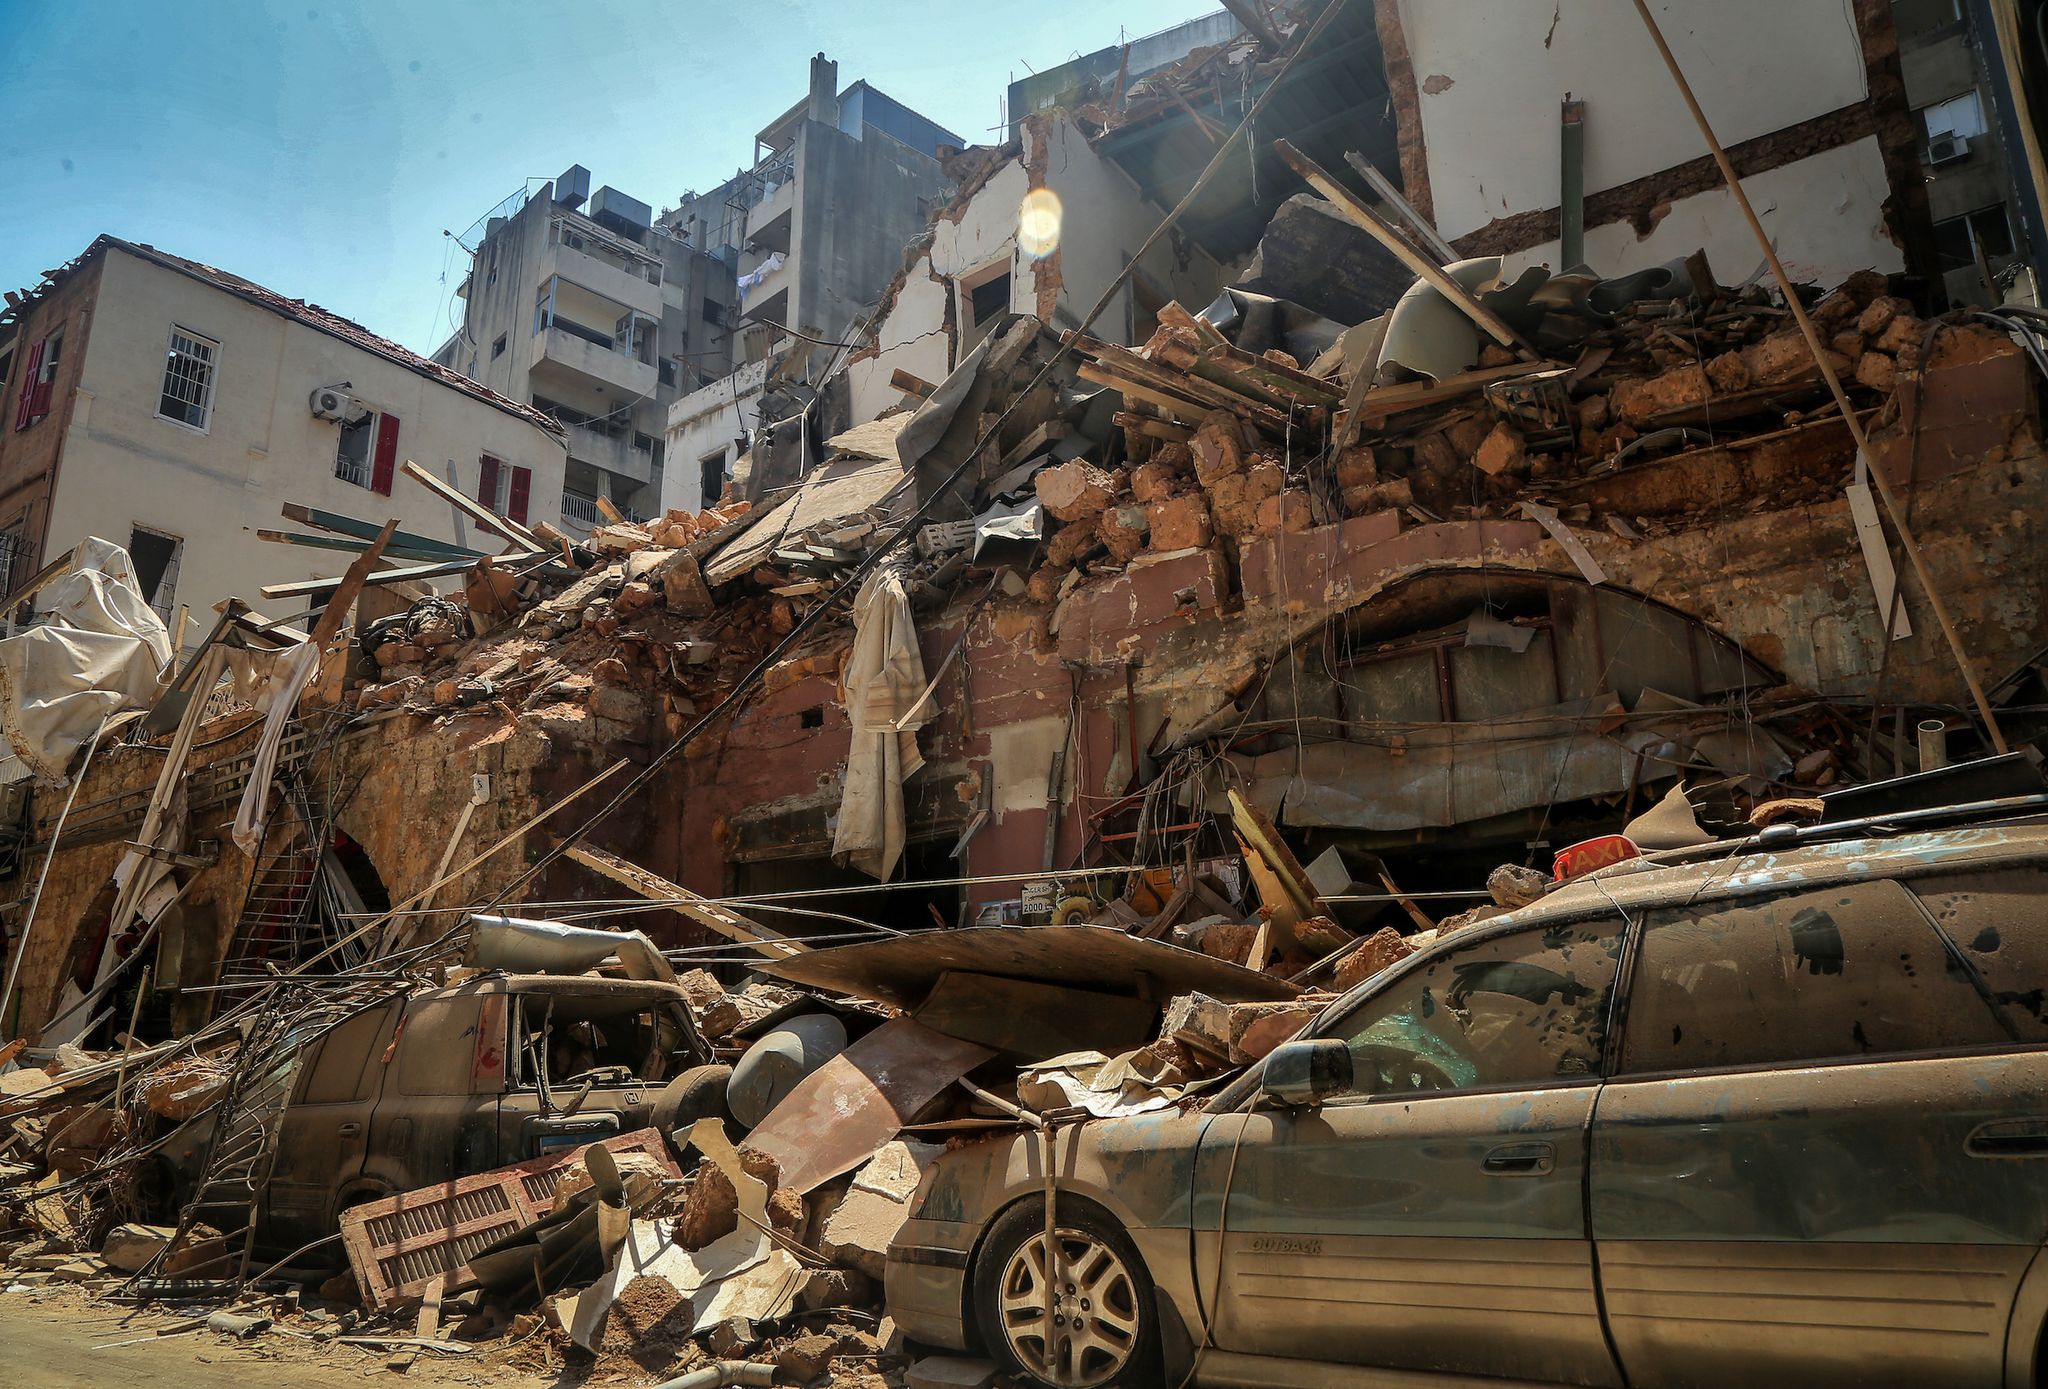 05 august 2020, lebanon, beirut cars are seen under the rubble of a destroyed house a day after a massive explosion in beirut's port that rocked the whole city, killing at least 100 people and injured thousands photo marwan naamanidpa photo by marwan naamanipicture alliance via getty images